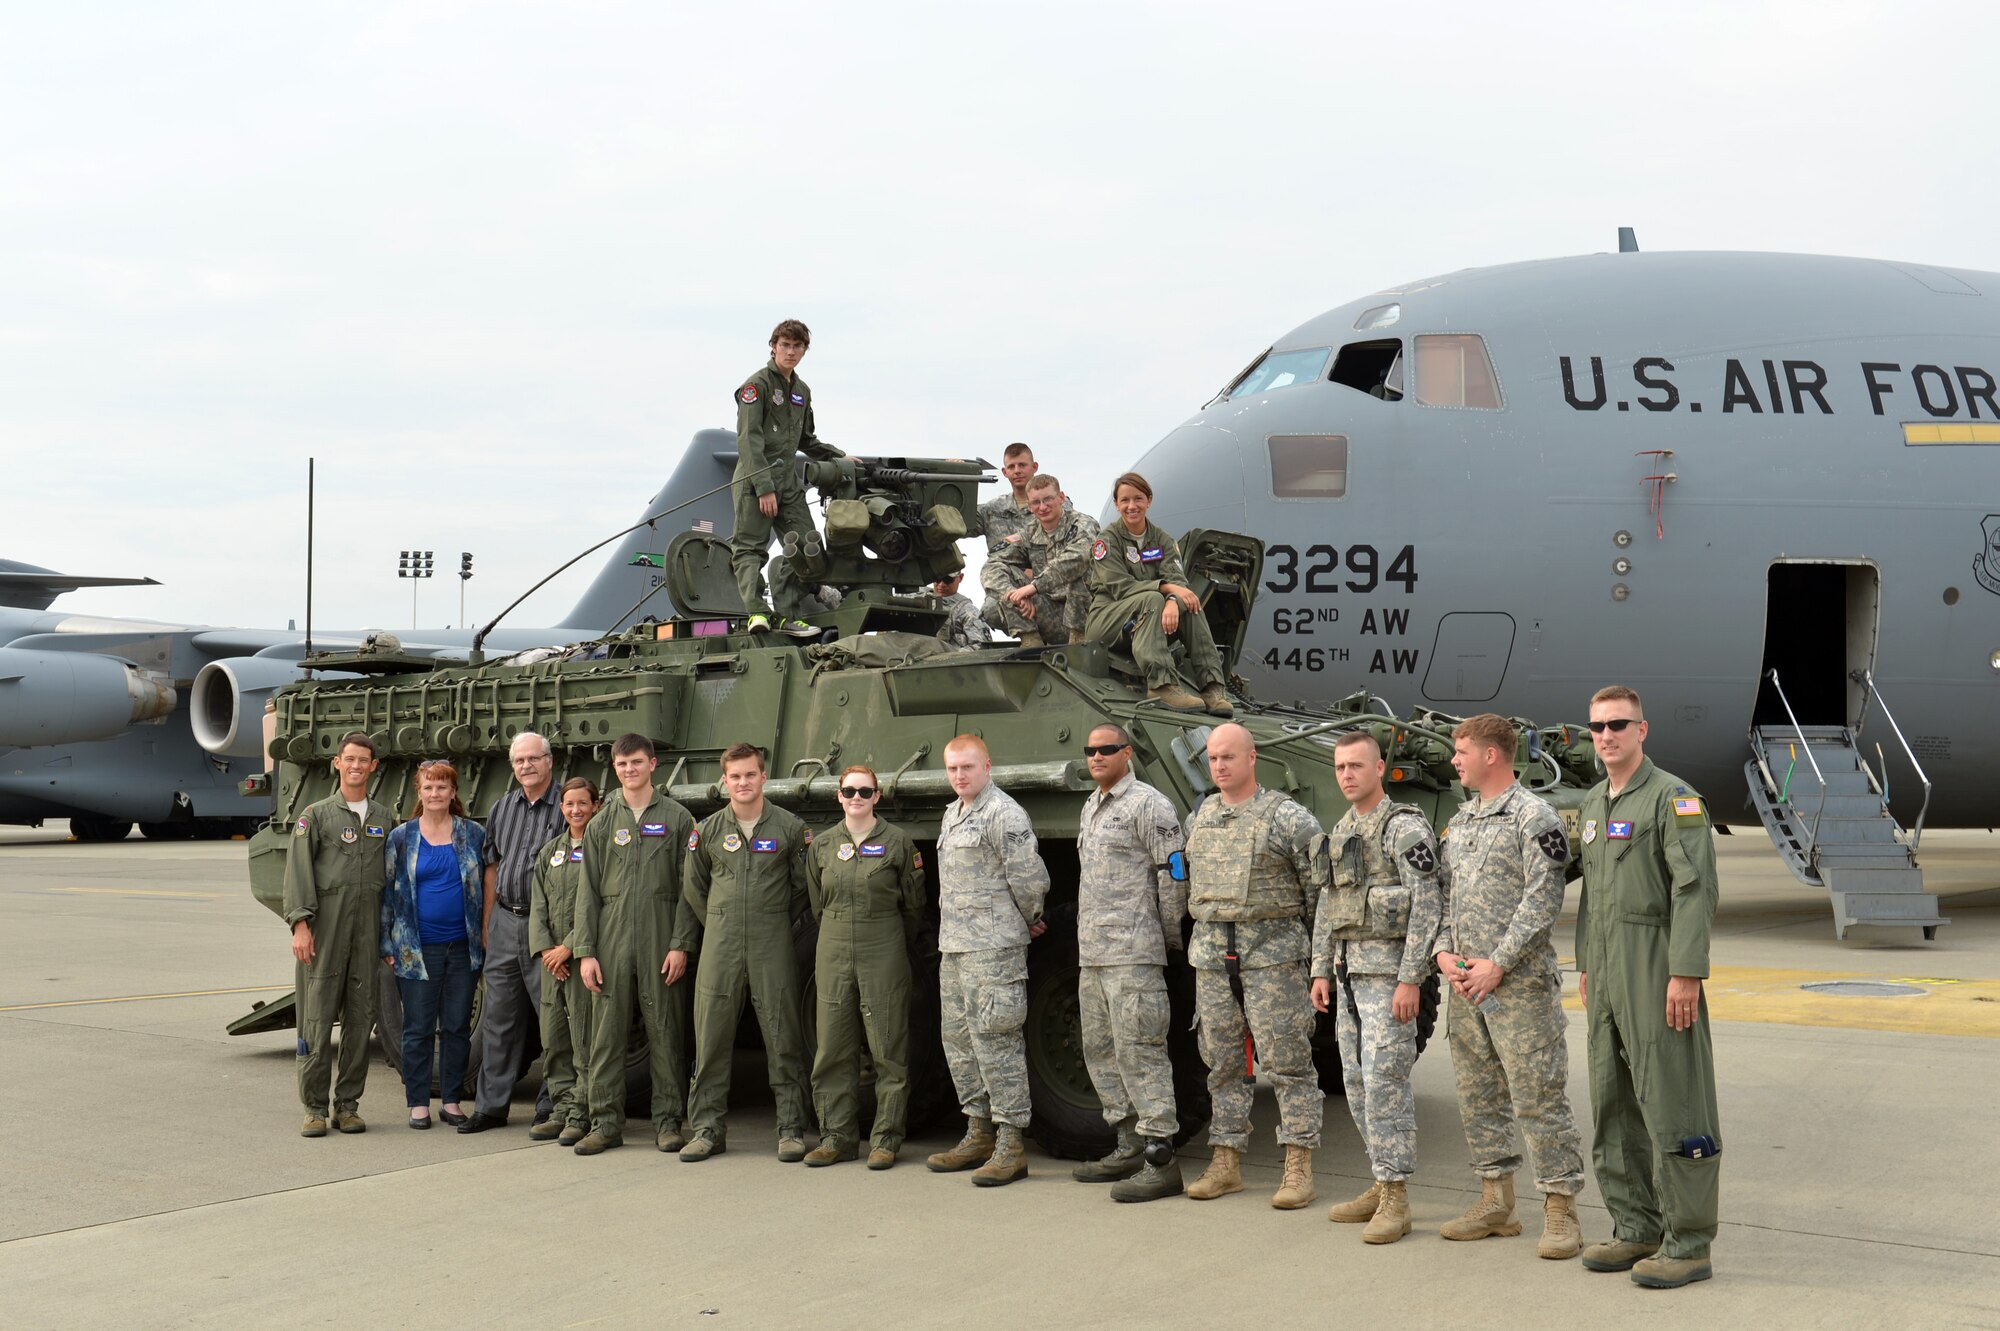 Military members that made Christian Ball’s Pilot for a Day possible, pose with him in front of a Stryker and C-17 Globemaster III aircraft Aug. 22, 2013 at Joint Base Lewis-McChord, Wash. The 4th Airlift Squadron has hosted the Pilot for a Day program since 2010. (U.S. Air Force photo/Staff Sgt. Jason Truskowski)